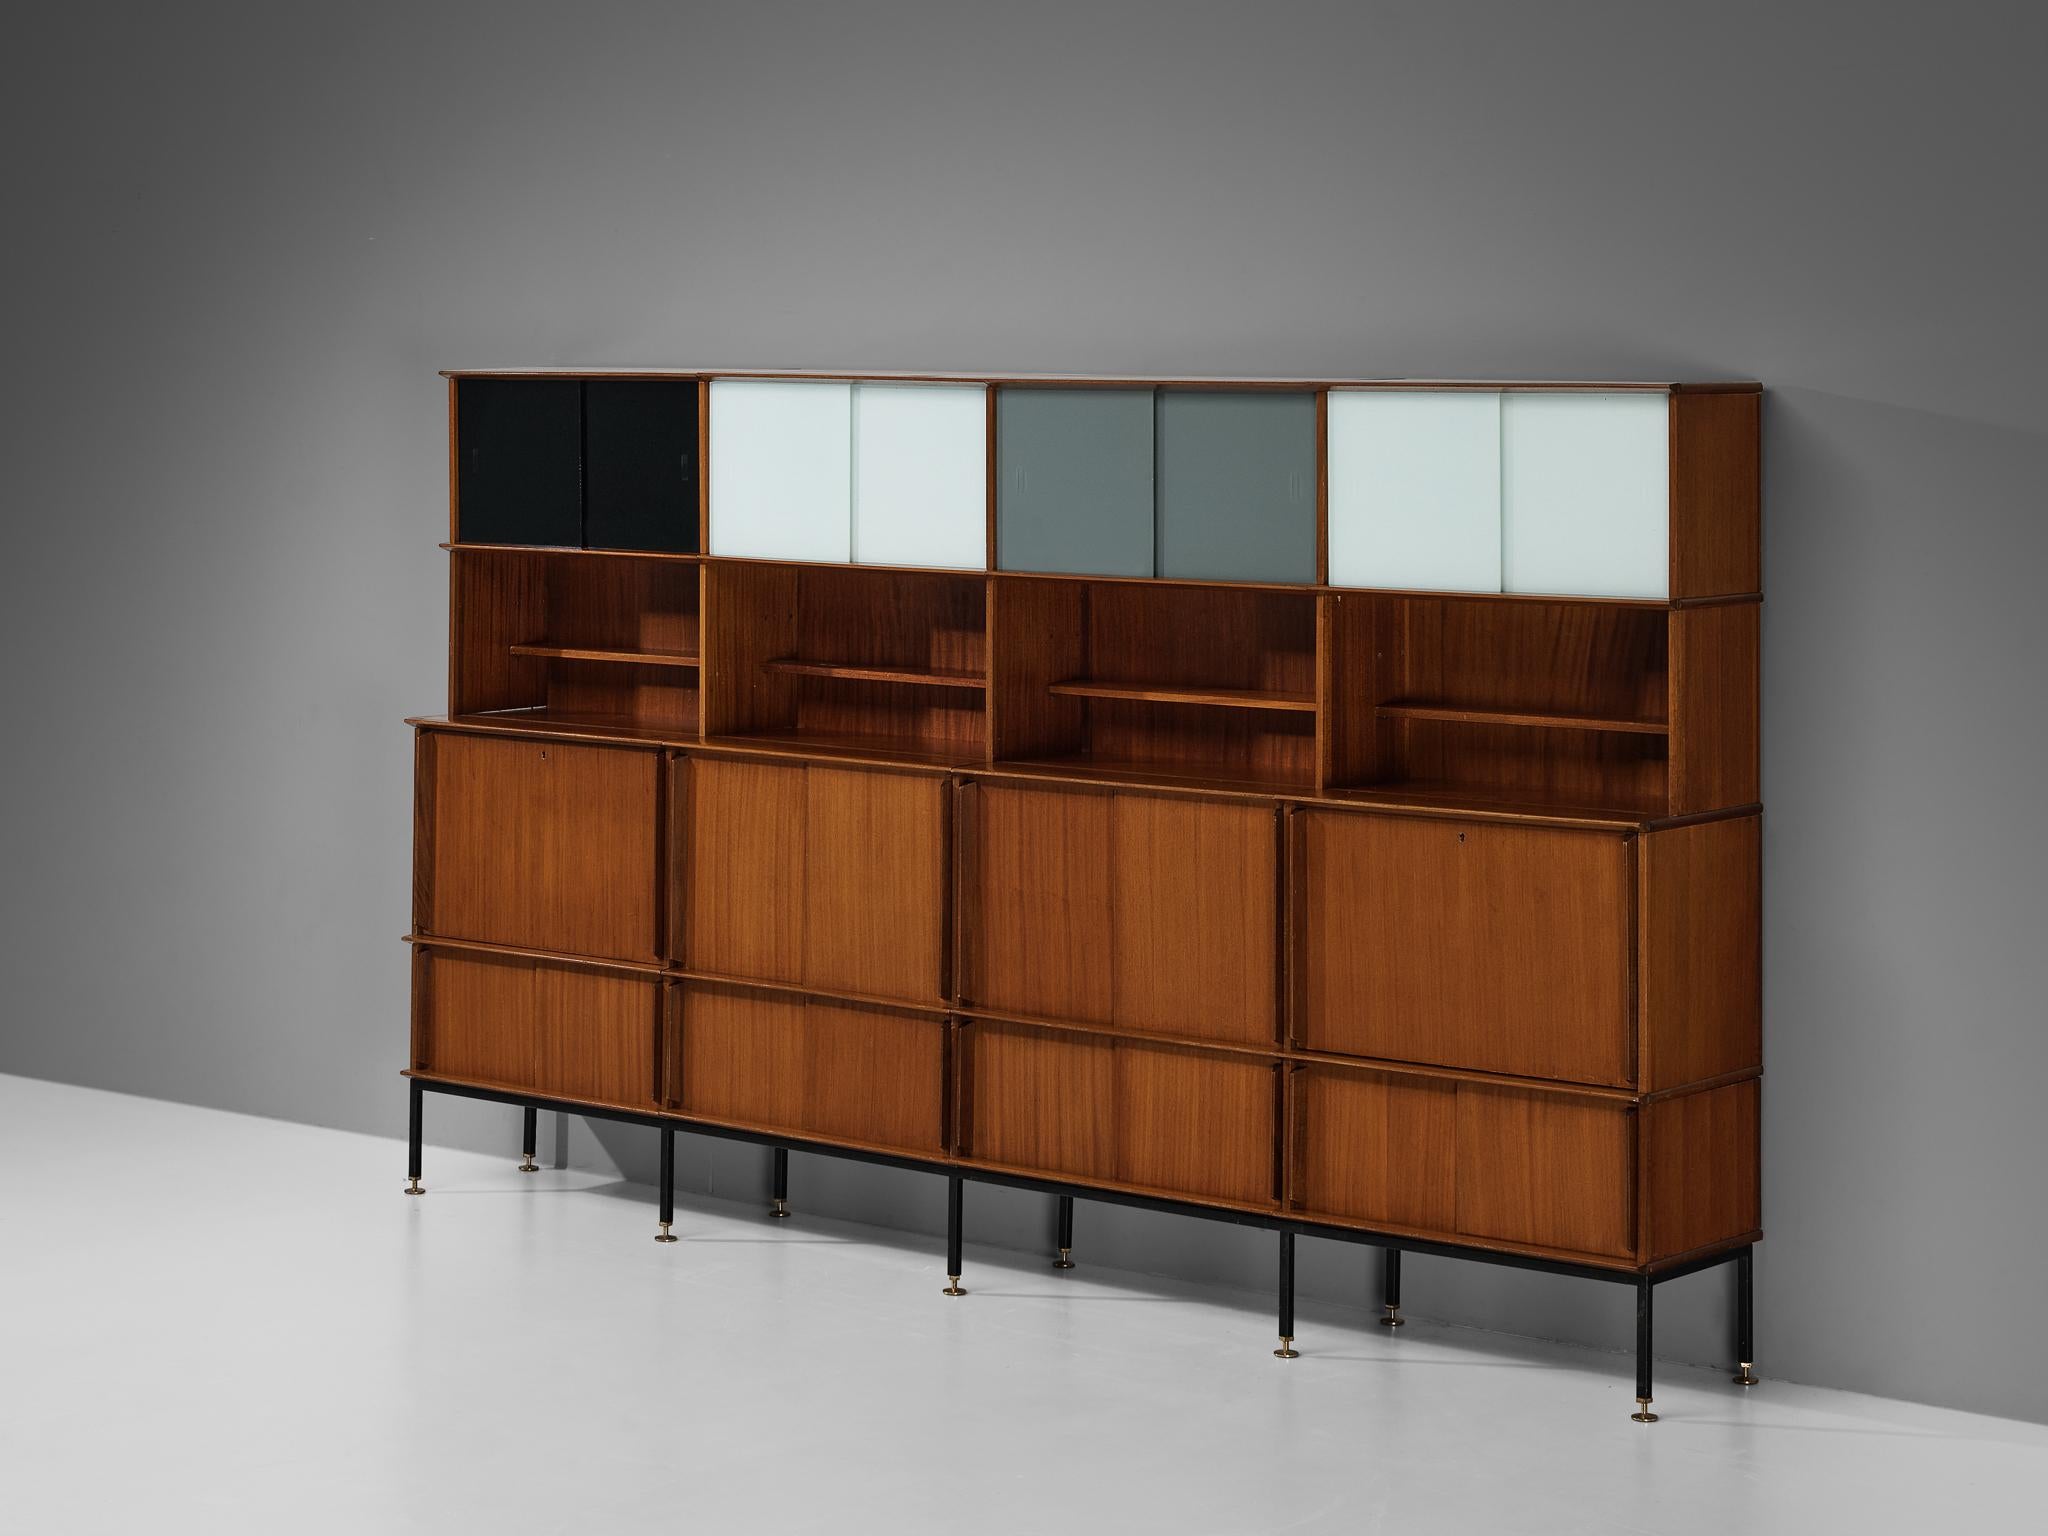 Large wall unit, mahogany, colored glass, brass, steel, France, 1950s

This delightful bookcase reflects the design principles of the Mid-Century era that rose to prominence in the 1950s and 1960s. The composition is based on four columns, each